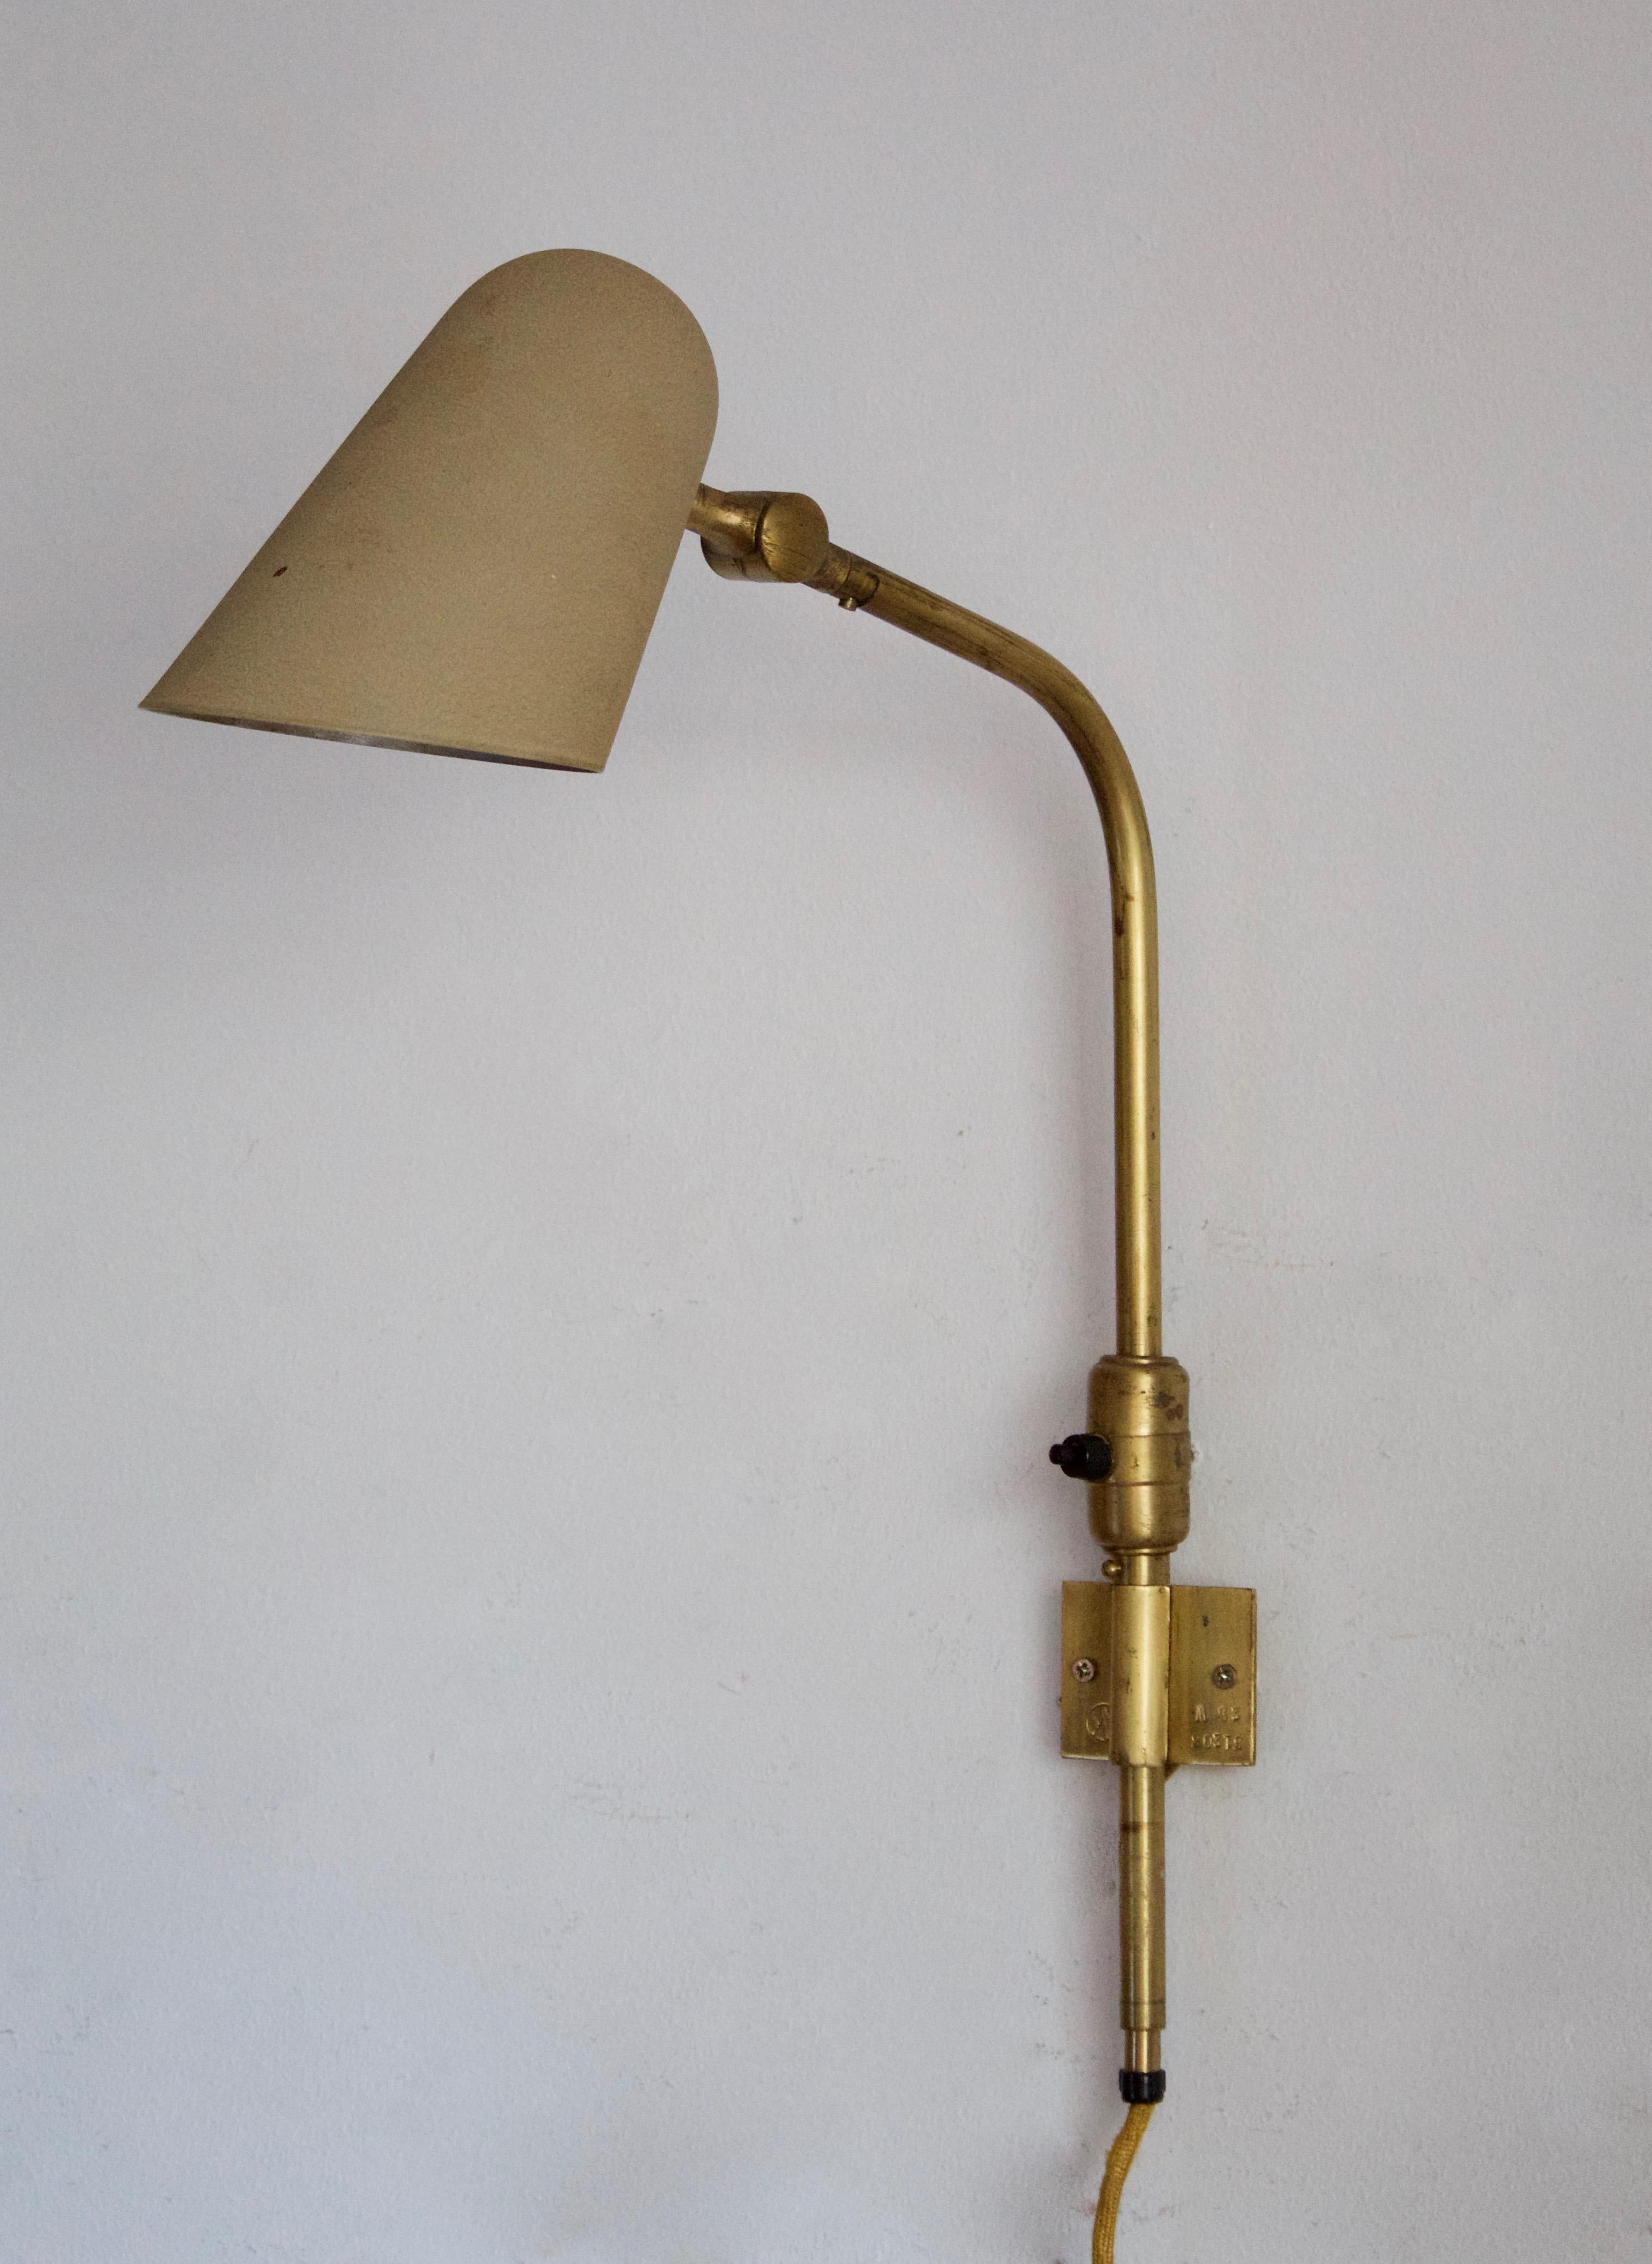 A task light / desk light / wall light, designed by Nordiska Kompaniet. Produced 1940s. Impressed with makers mark and model number.

Likely originally designed to be mounted on a work table. Can be wall-mounted, however, requires installing a